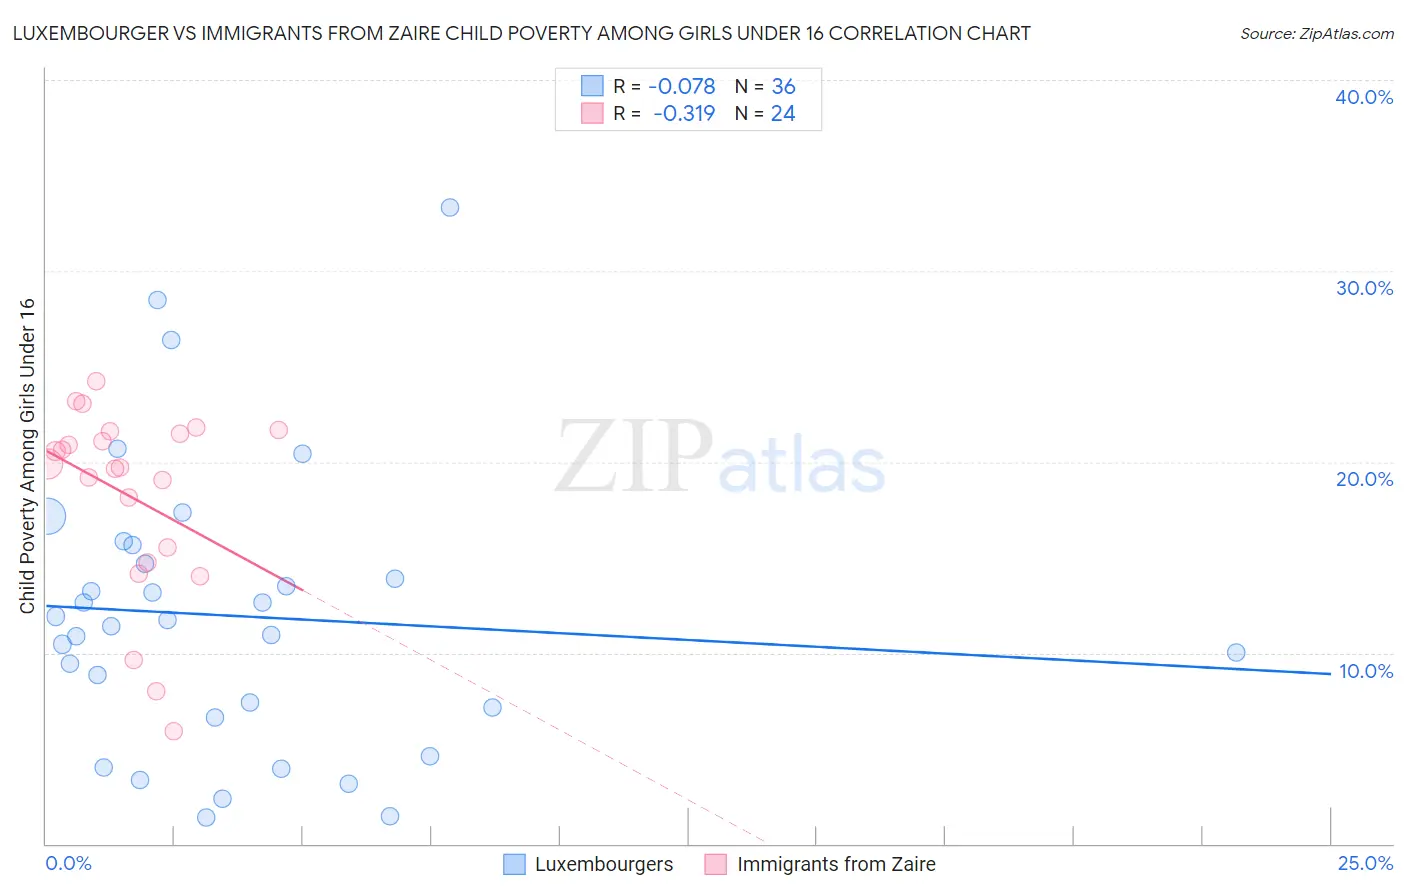 Luxembourger vs Immigrants from Zaire Child Poverty Among Girls Under 16